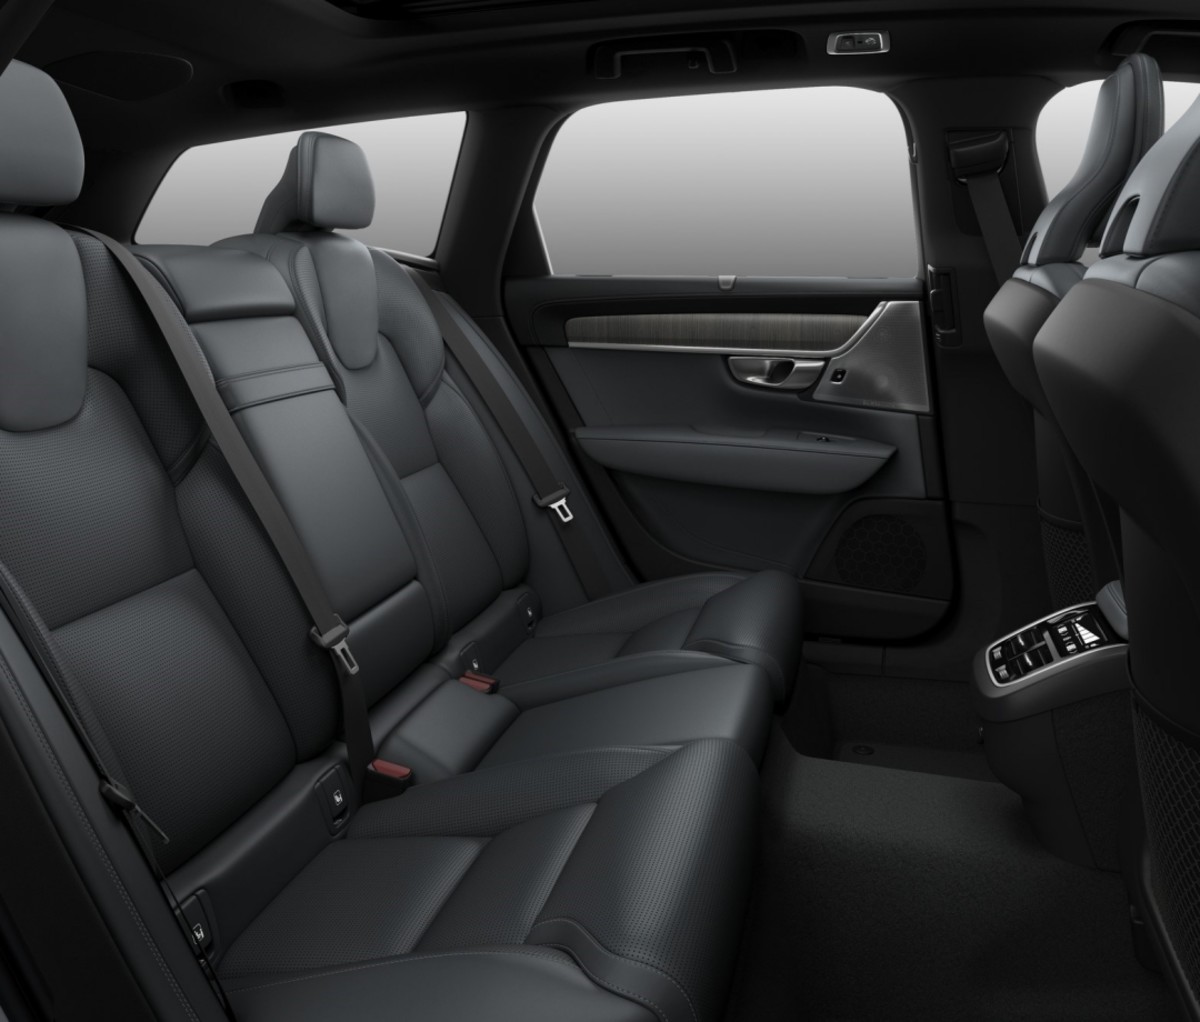 2021 Volvo V90 Cross Country back seat in black leather